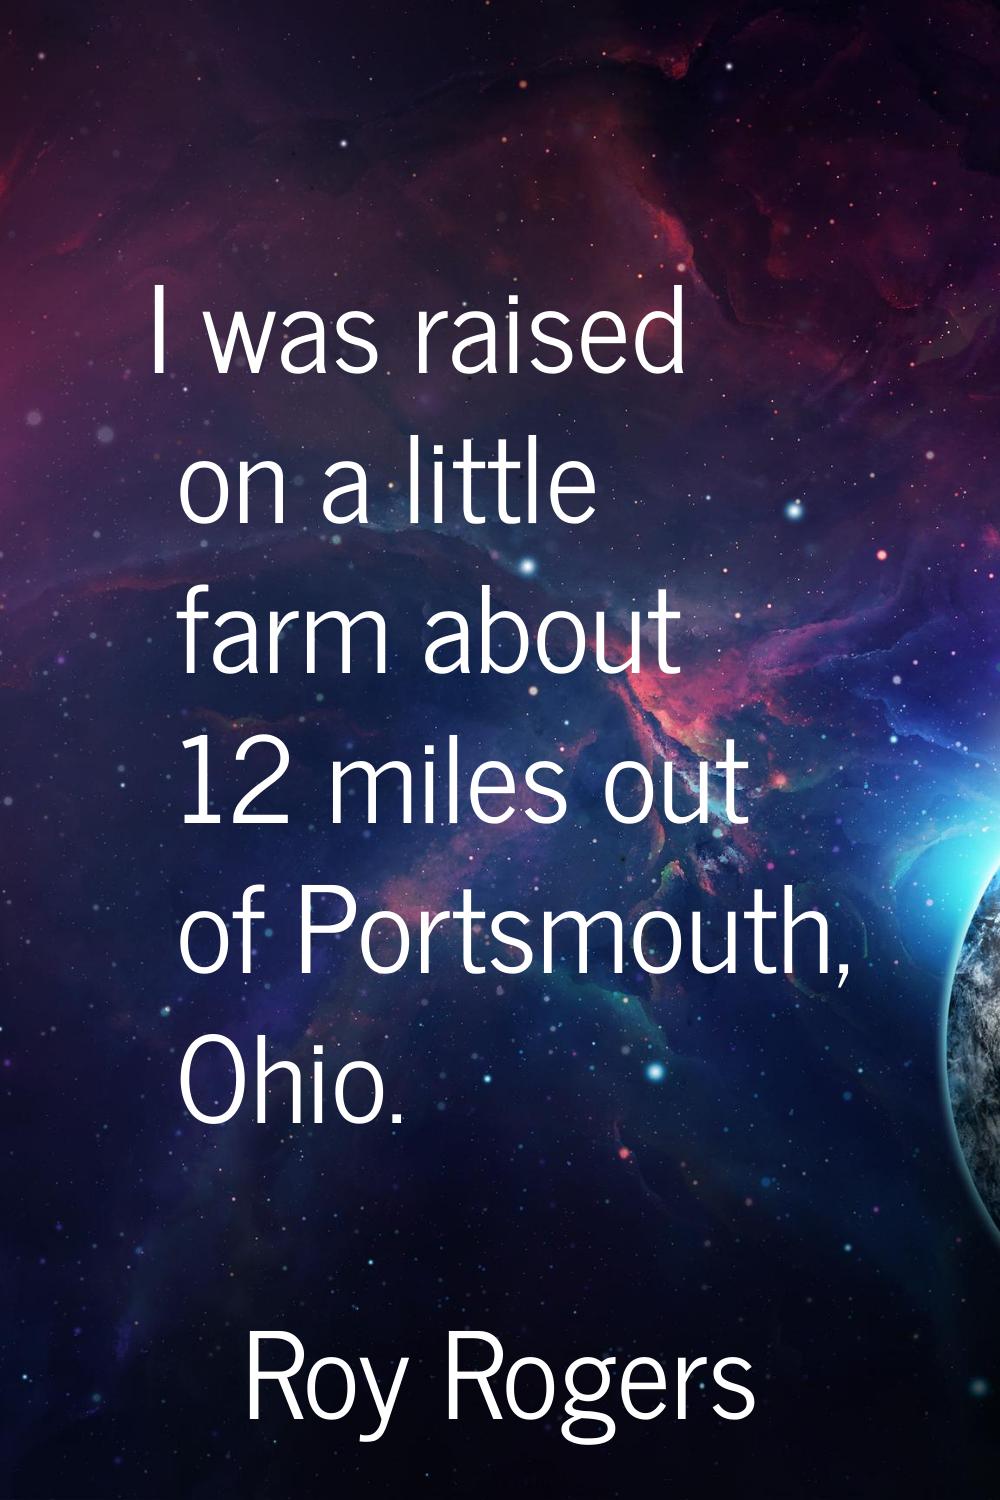 I was raised on a little farm about 12 miles out of Portsmouth, Ohio.